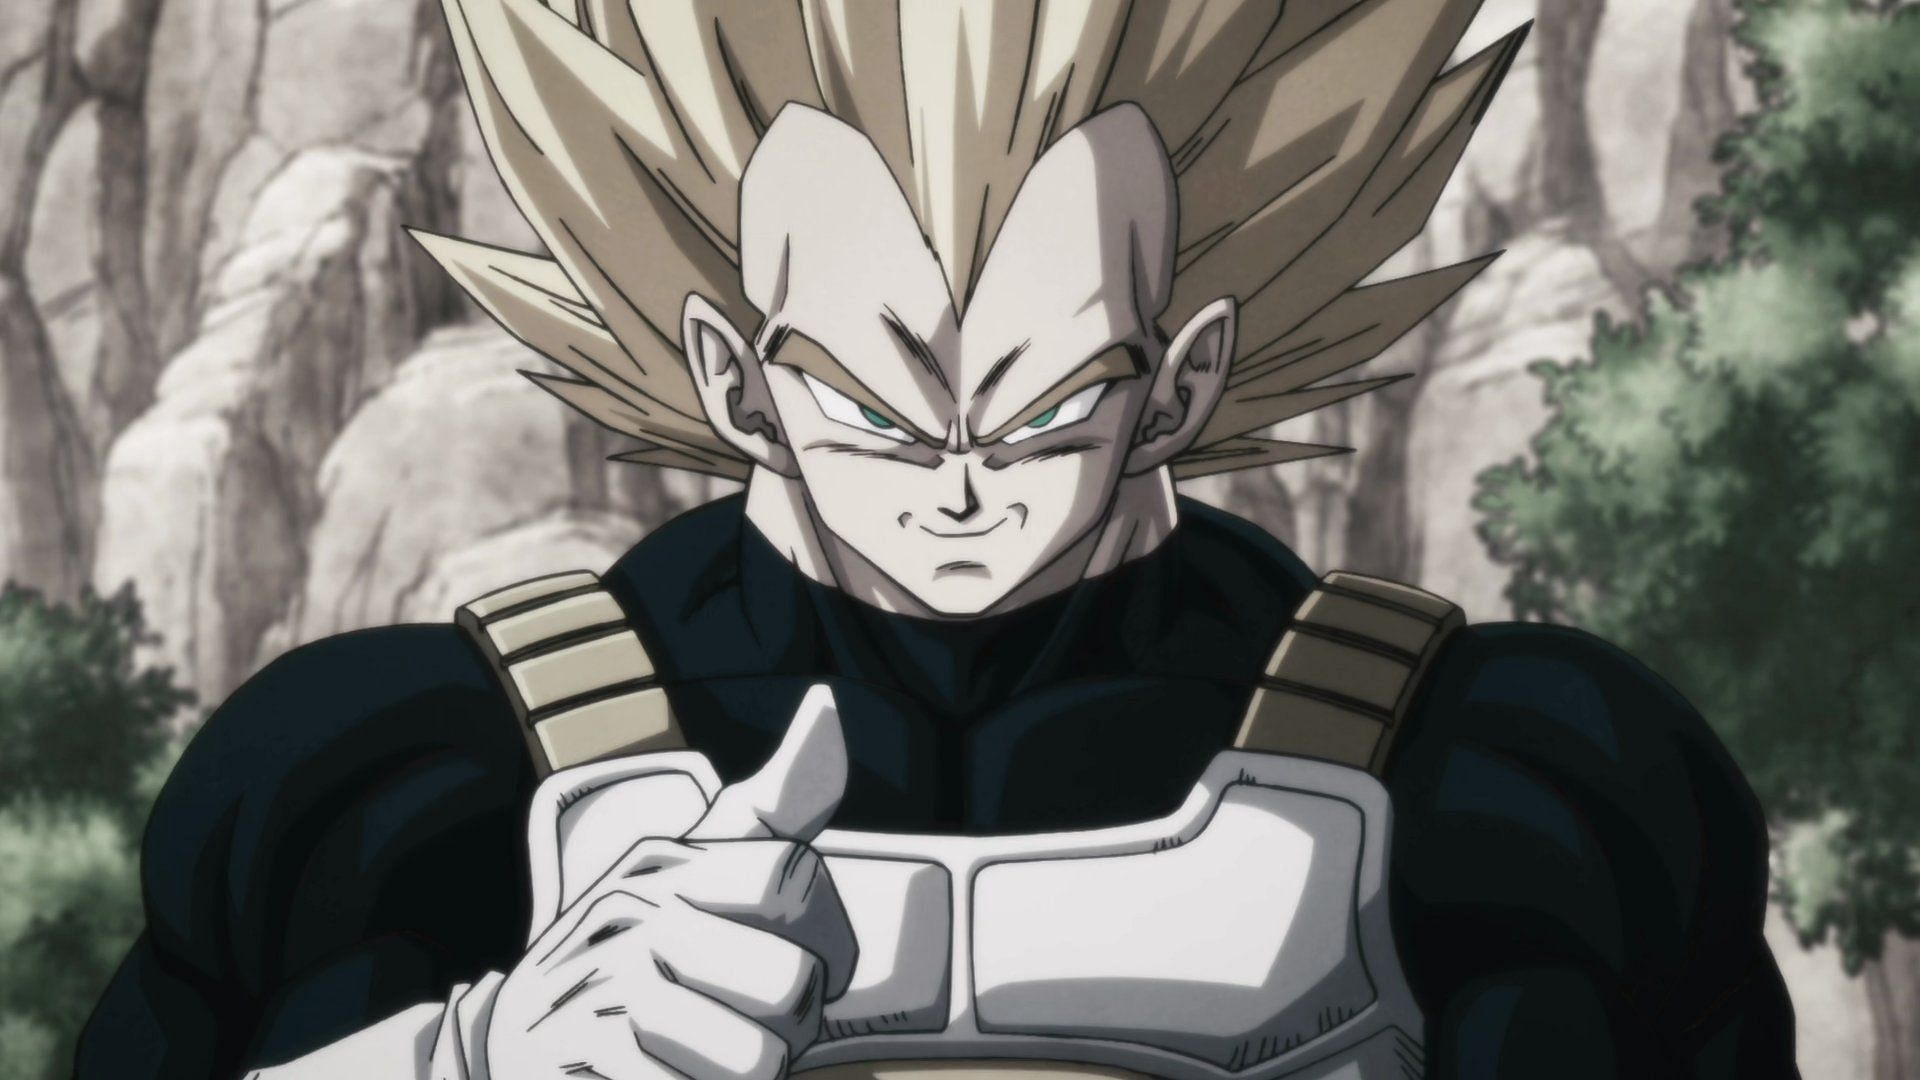 Vegeta as imagined in the Dragon Ball remake (Image via Toei Animation)